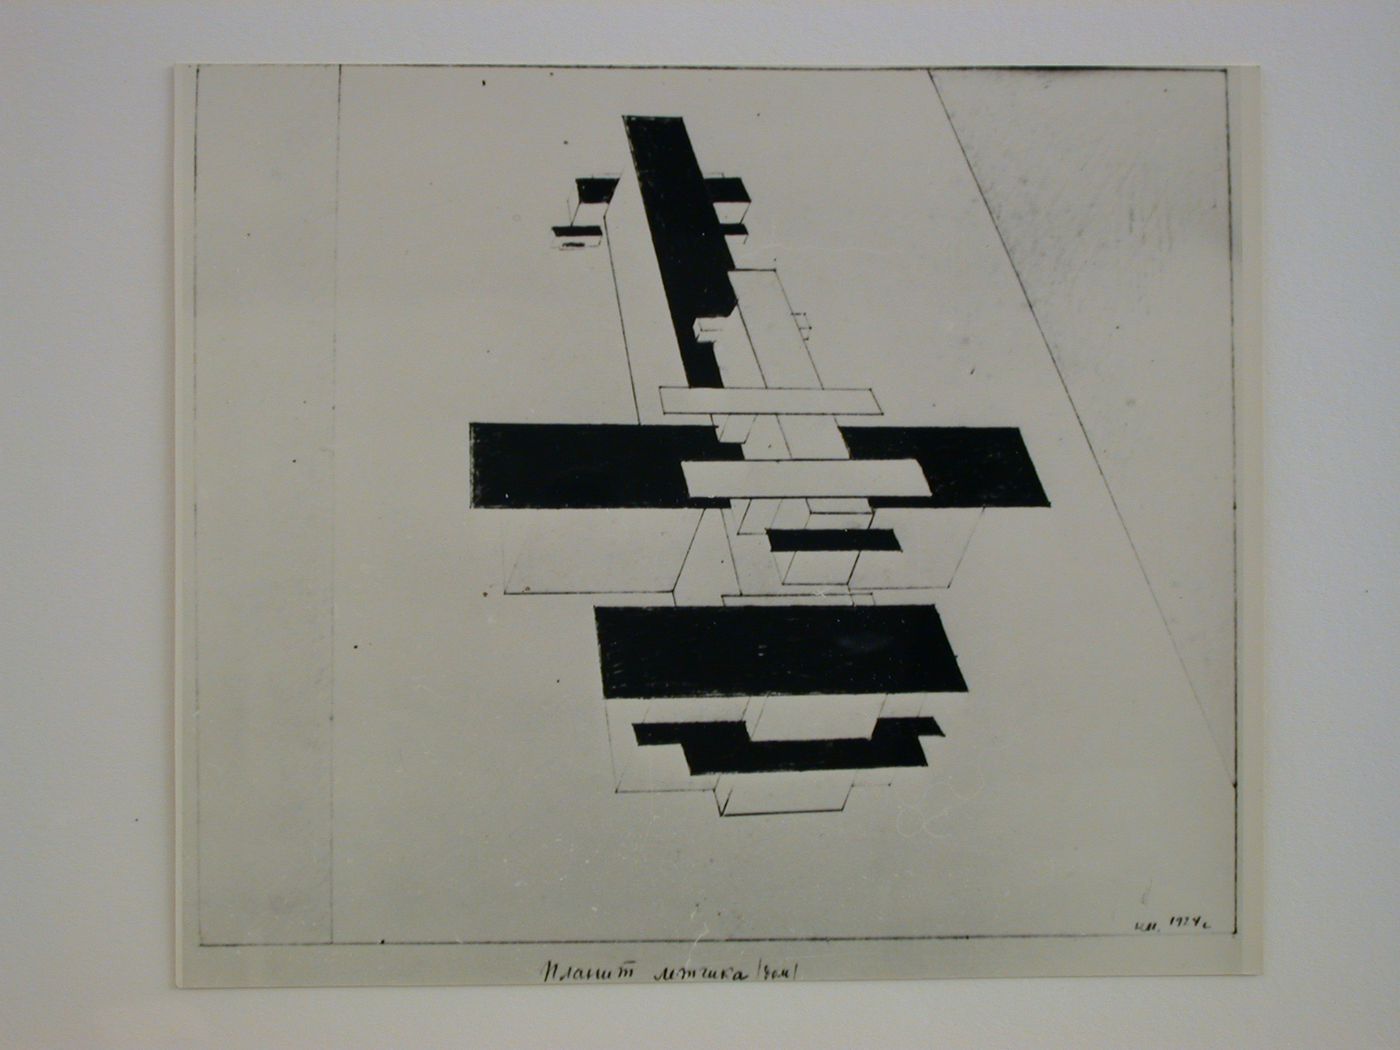 Photograph of a bird's-eye perspective drawing for the Airman's Planit (Apartment House), Moscow